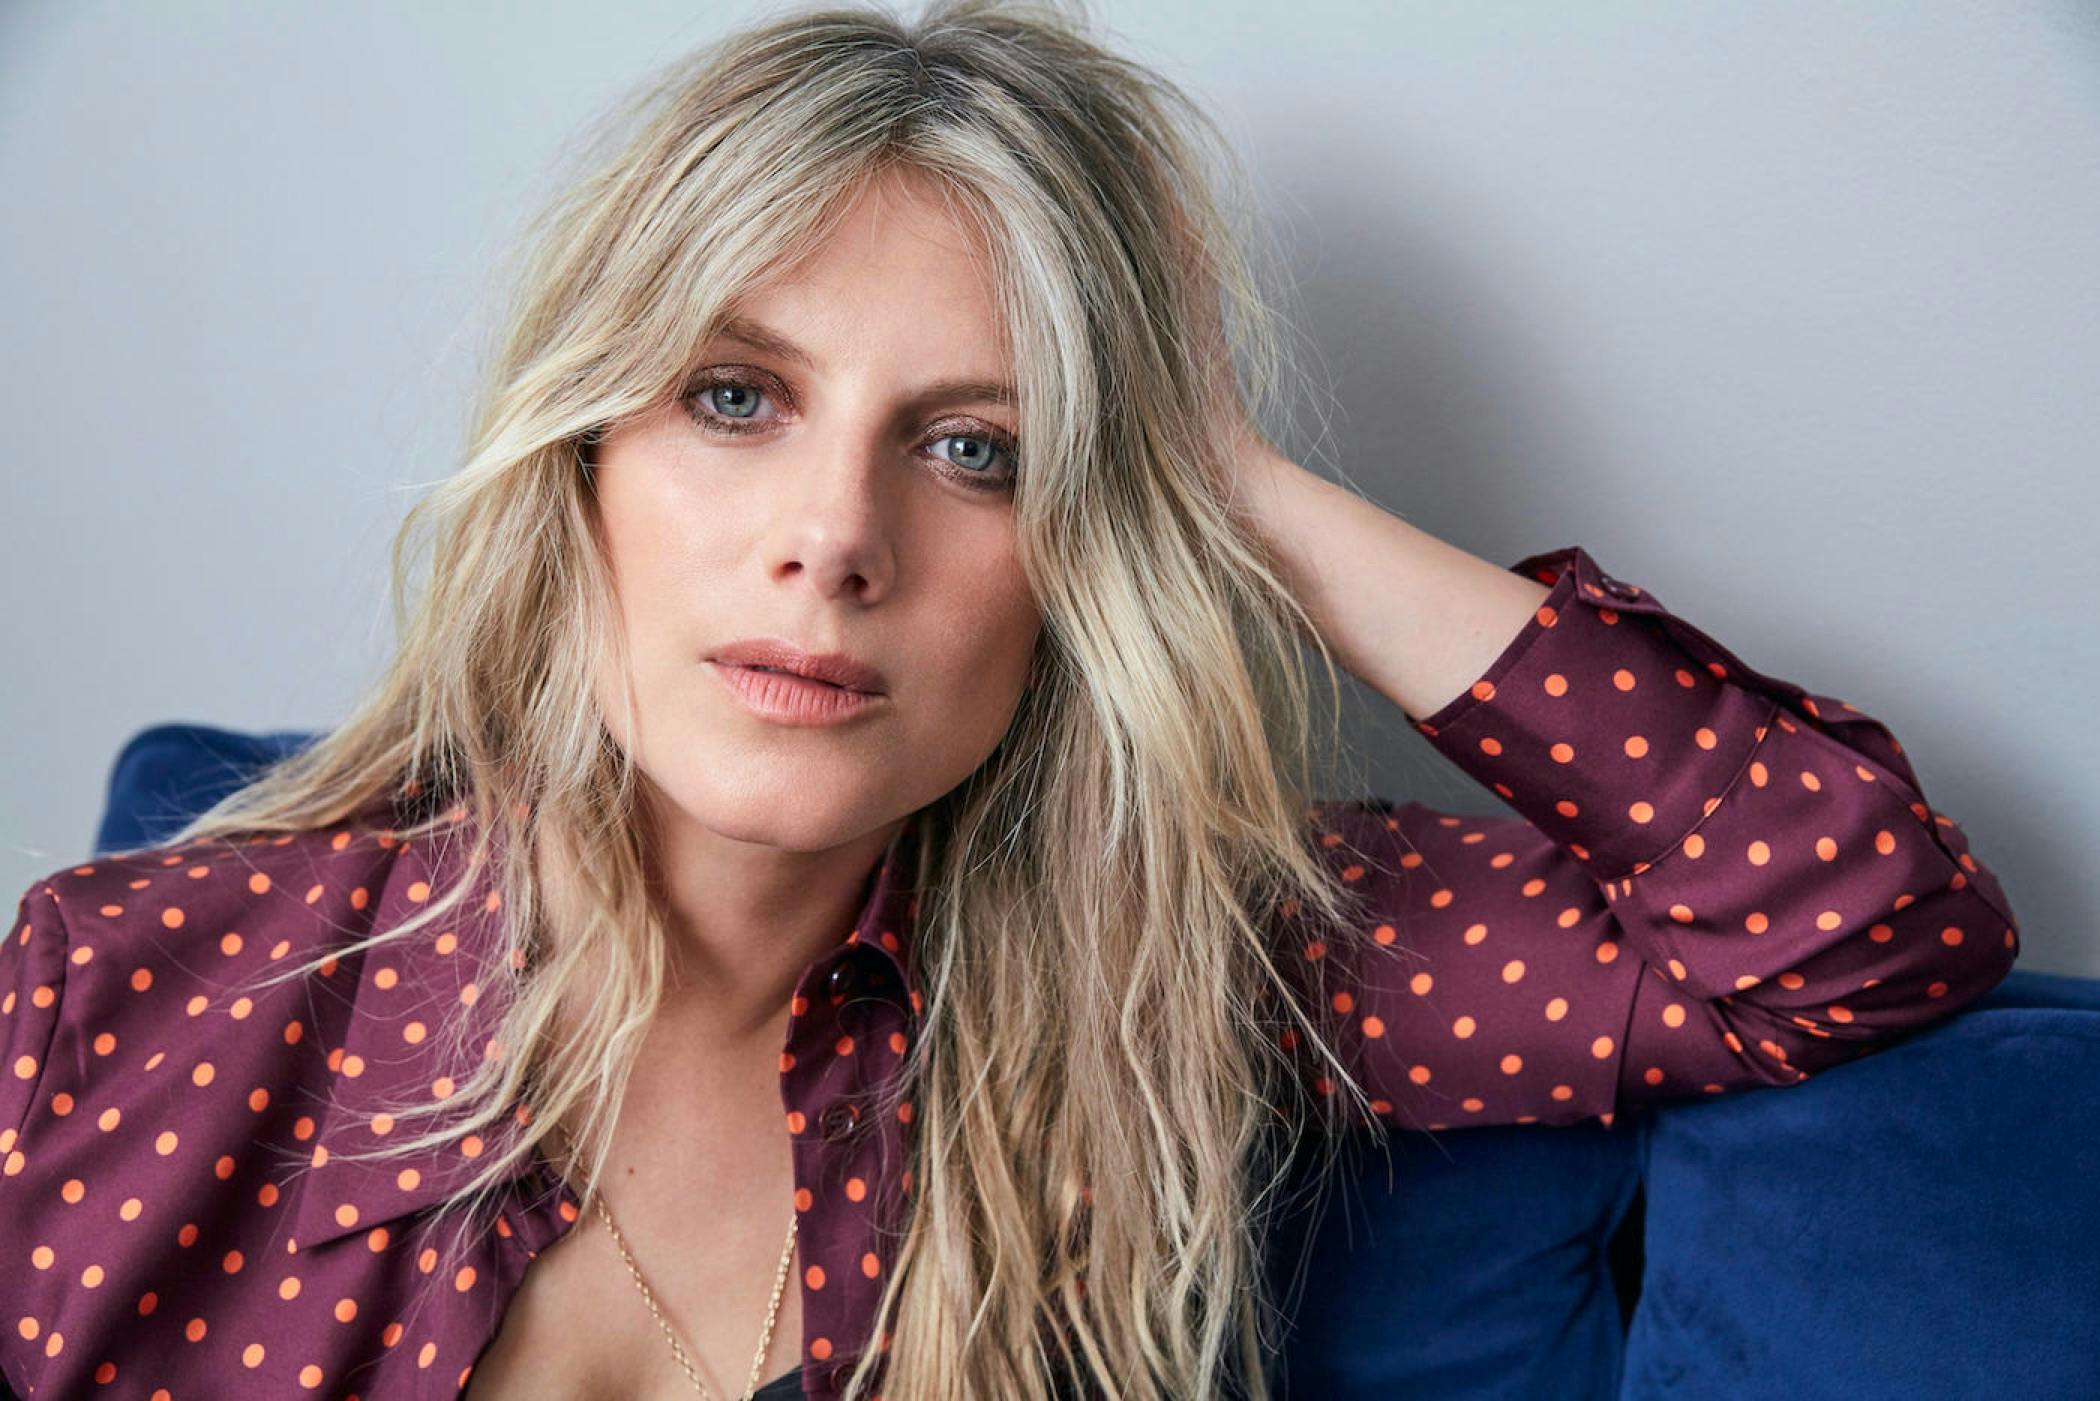 Laurent wears a maroon and orange-polka-dotted blouse, gold jewelry, and sits on a blue couch. Her blond hair is long, and she stares right at the camera.